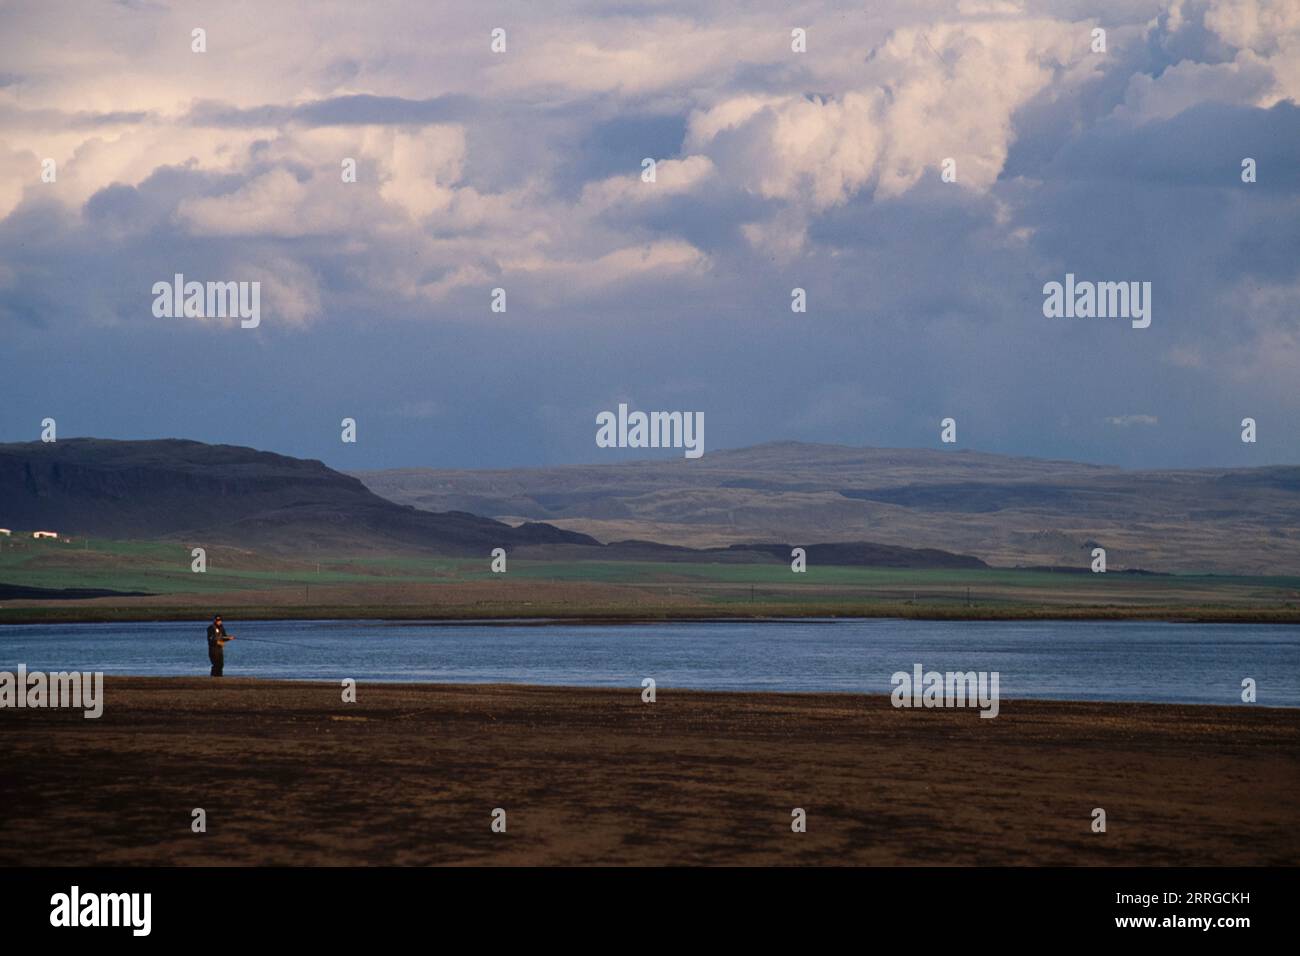 A man fishing at a lake in Iceland Stock Photo